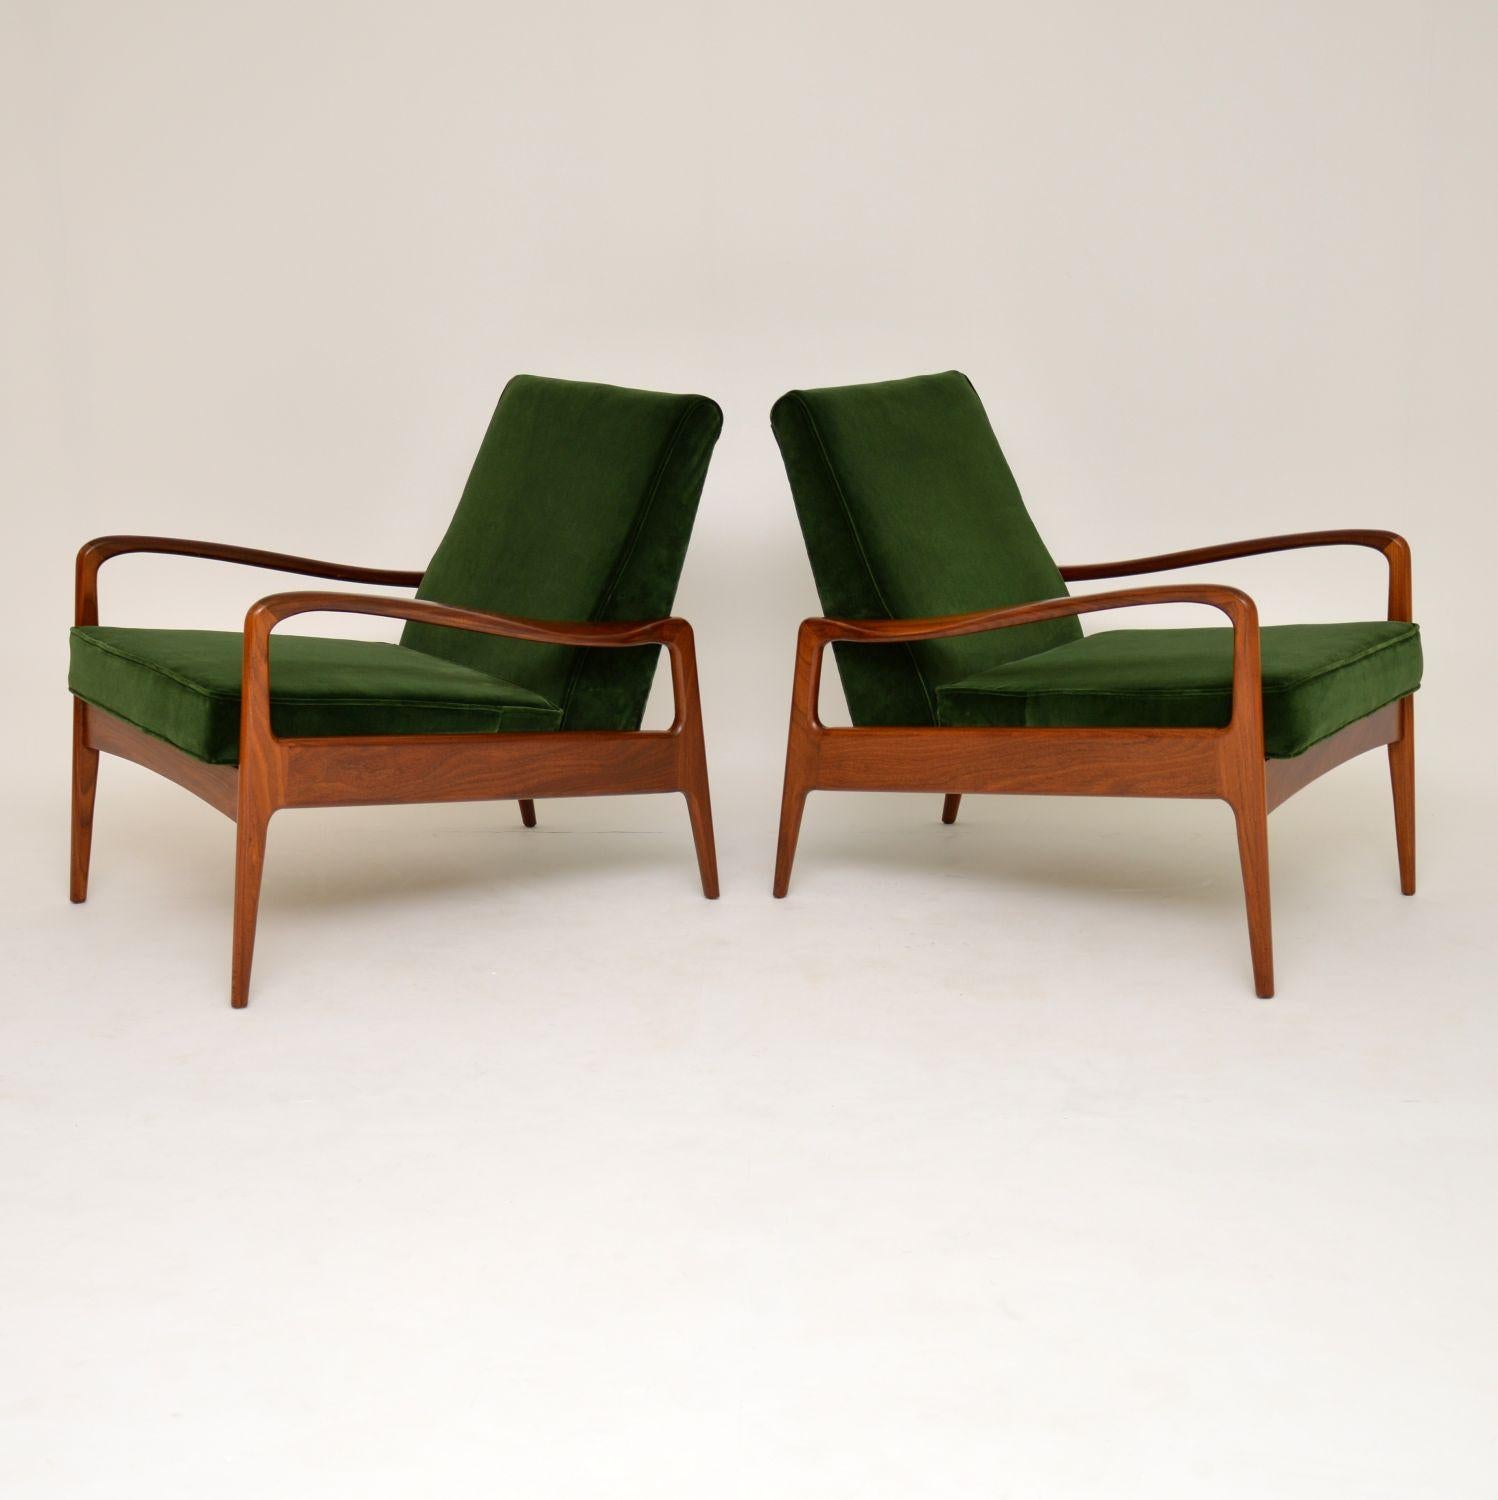 A stunning pair of vintage armchairs, these were made by Greaves & Thomas in the 1960s, they are of super quality and design. We have had these fully restored to a very high standard, the condition is superb throughout. The solid afromosia frames